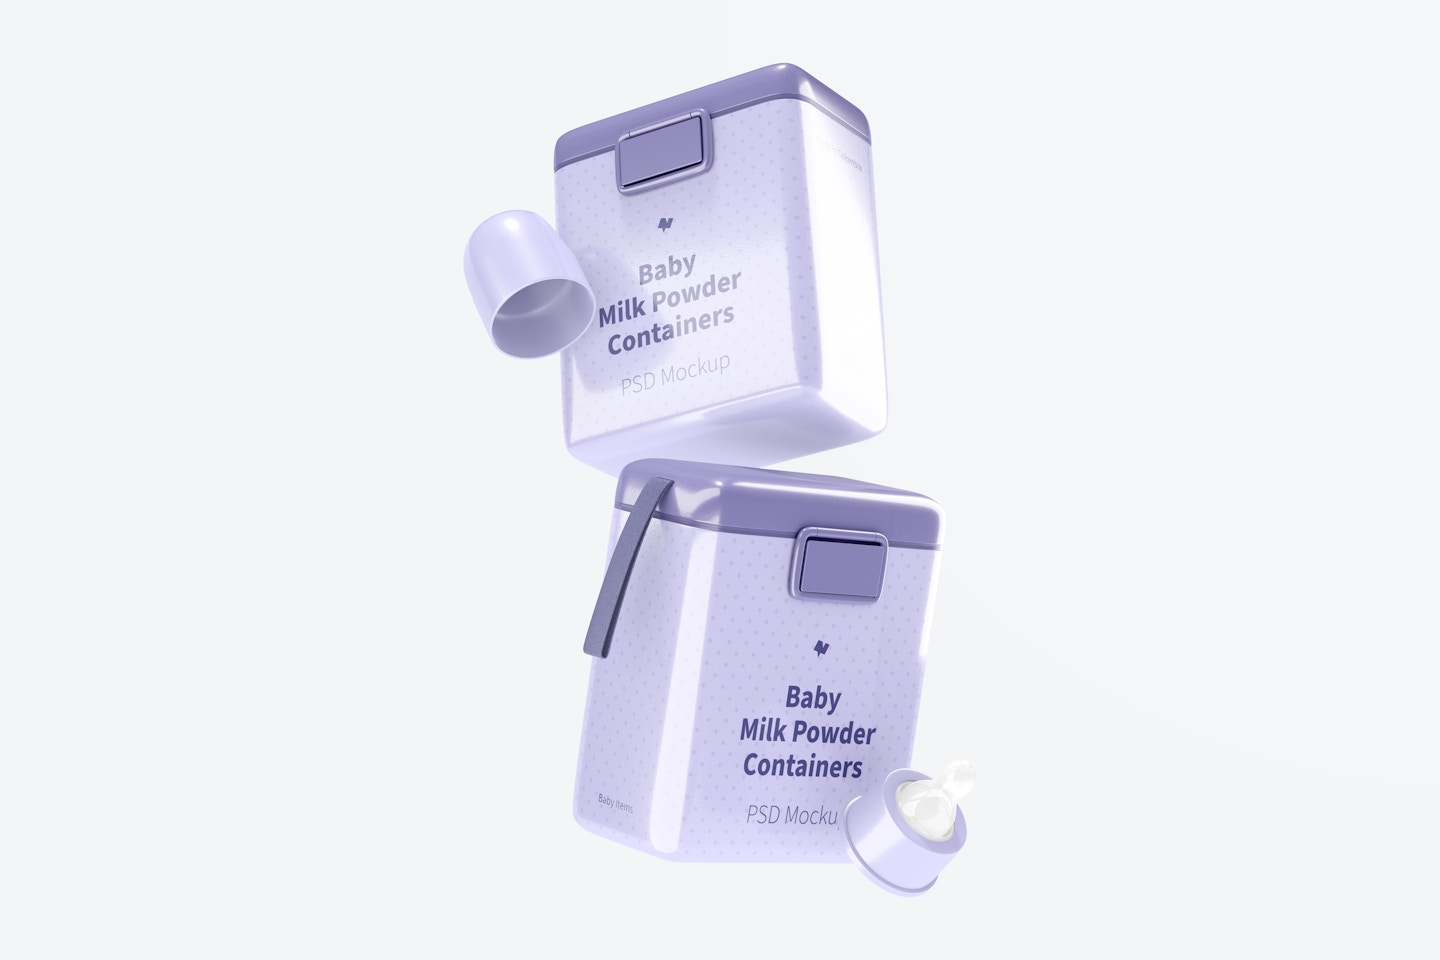 Large Baby Milk Powder Containers Mockup, Falling